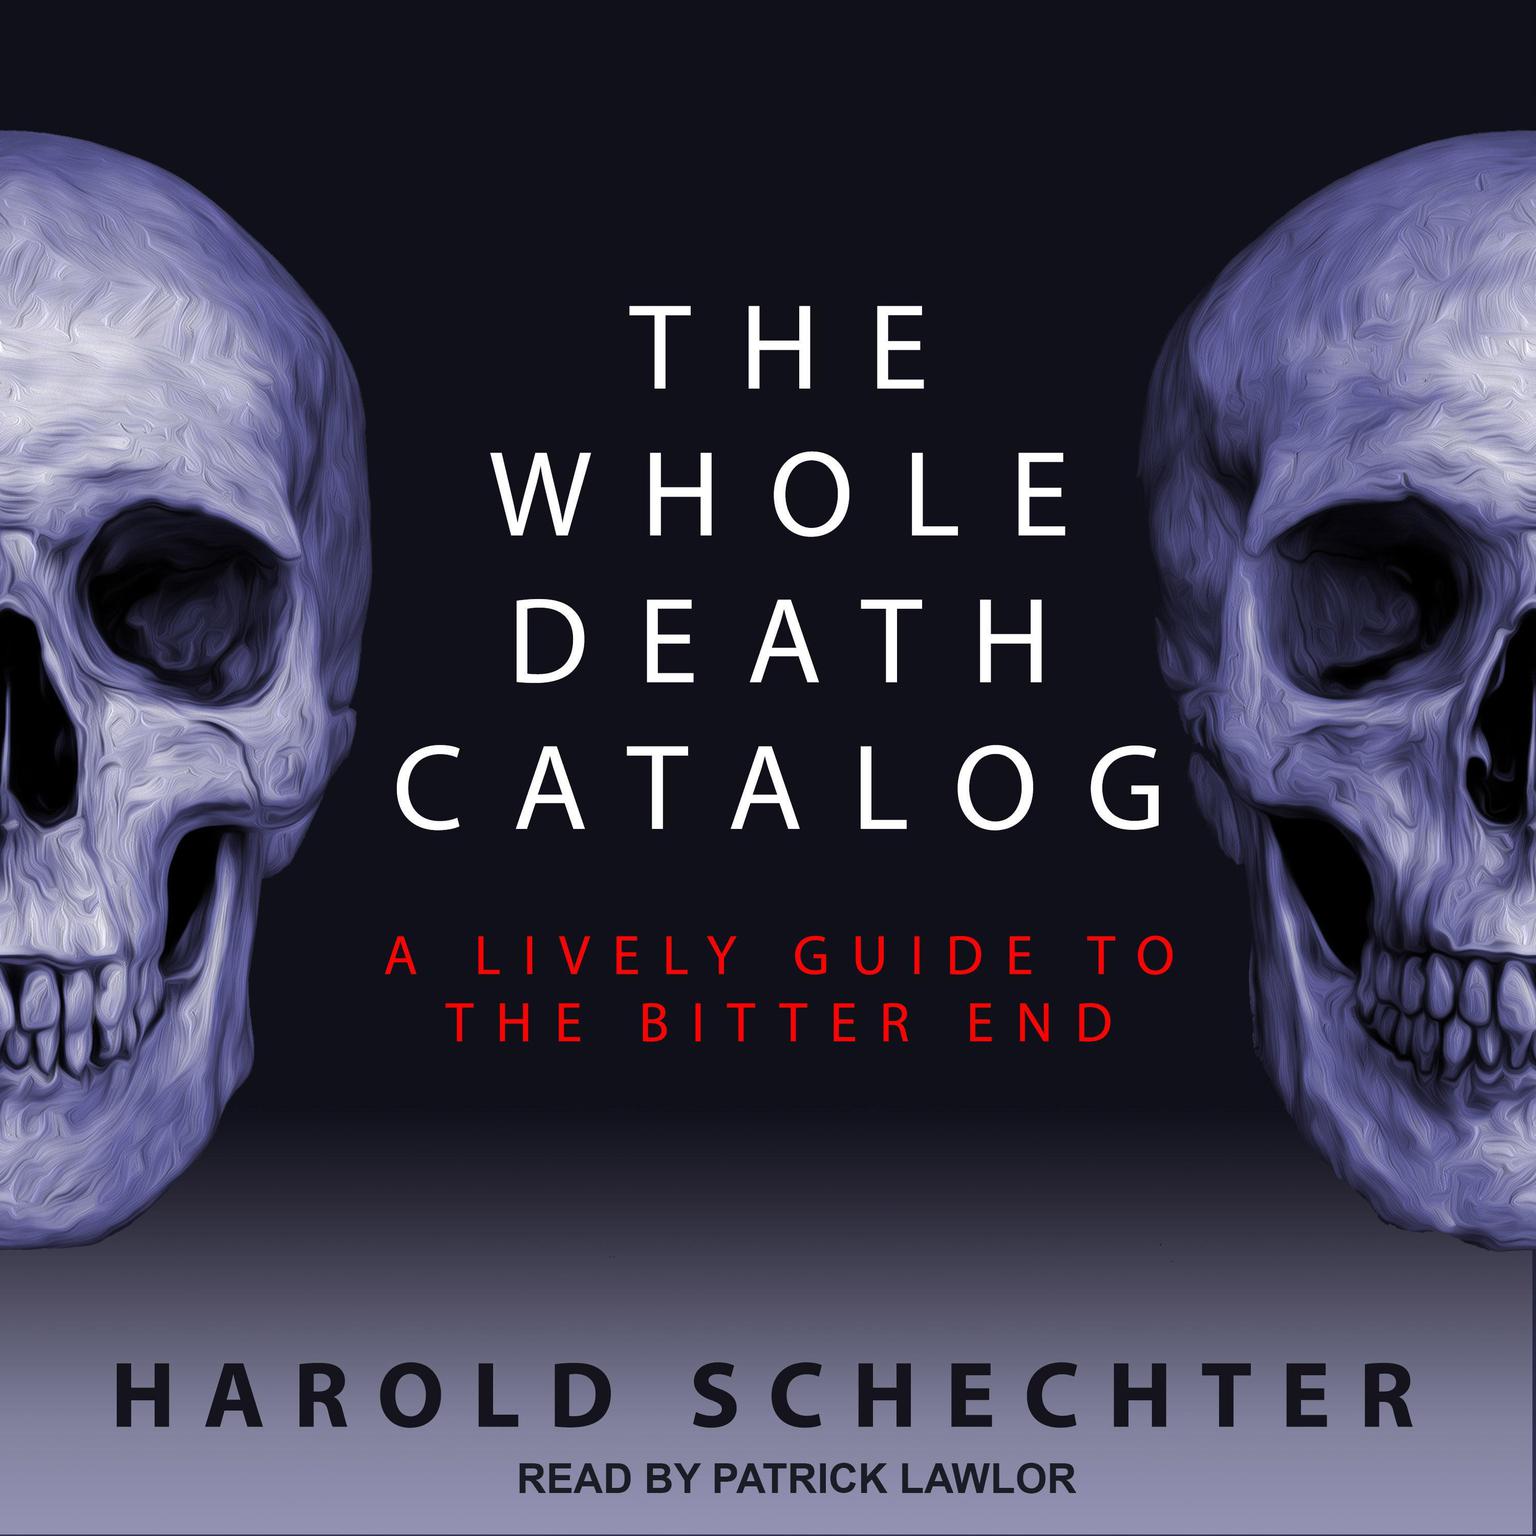 The Whole Death Catalog: A Lively Guide to the Bitter End Audiobook, by Harold Schechter